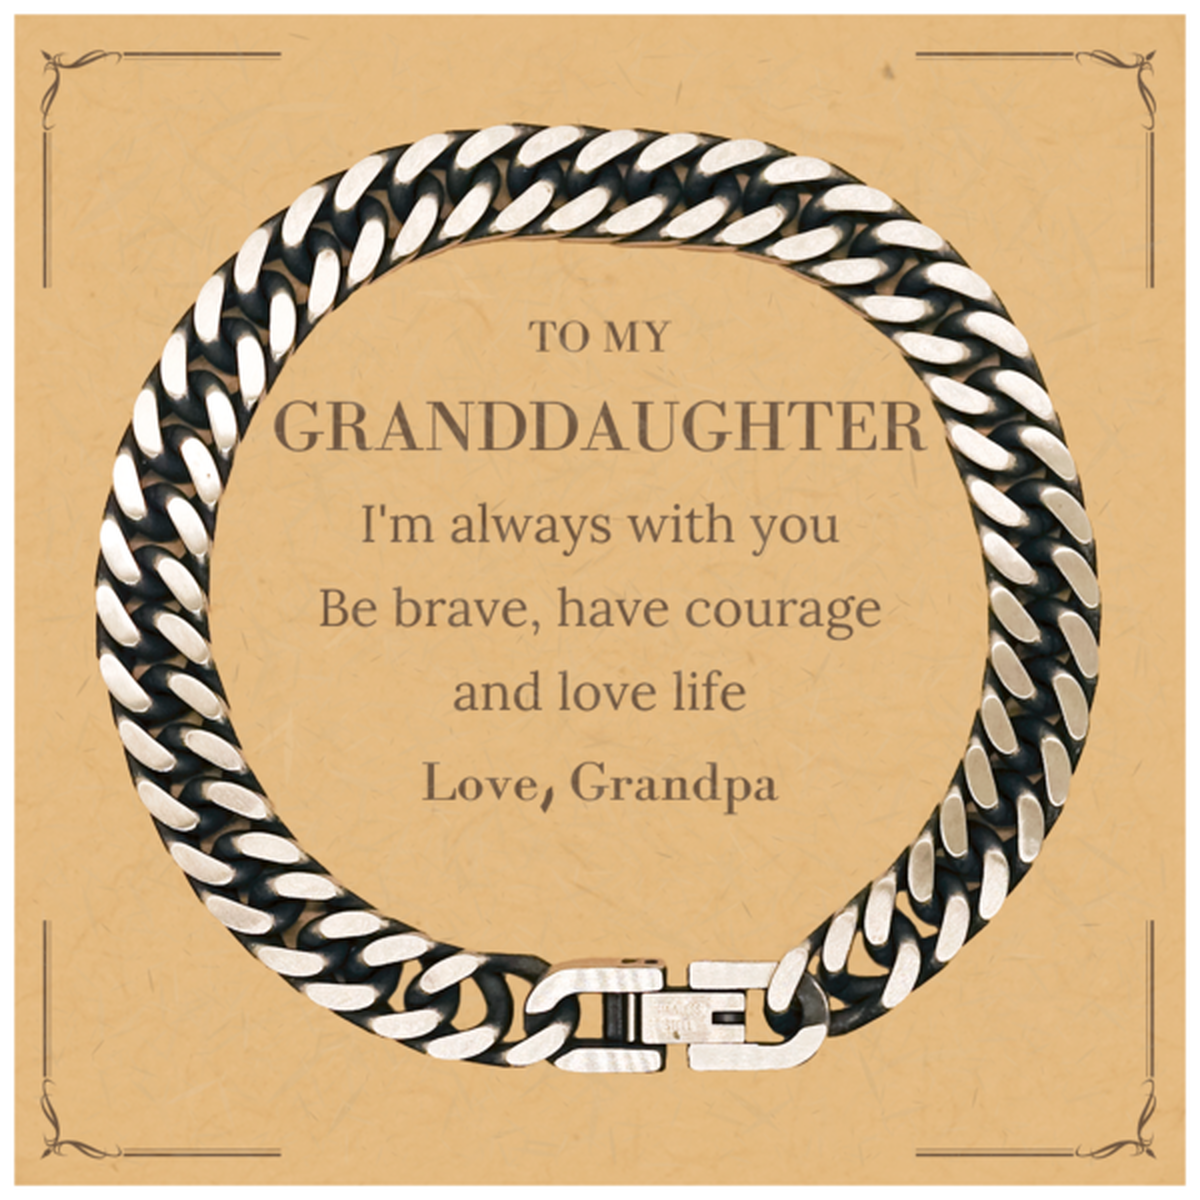 To My Granddaughter Gifts from Grandpa, Unique Cuban Link Chain Bracelet Inspirational Christmas Birthday Graduation Gifts for Granddaughter I'm always with you. Be brave, have courage and love life. Love, Grandpa